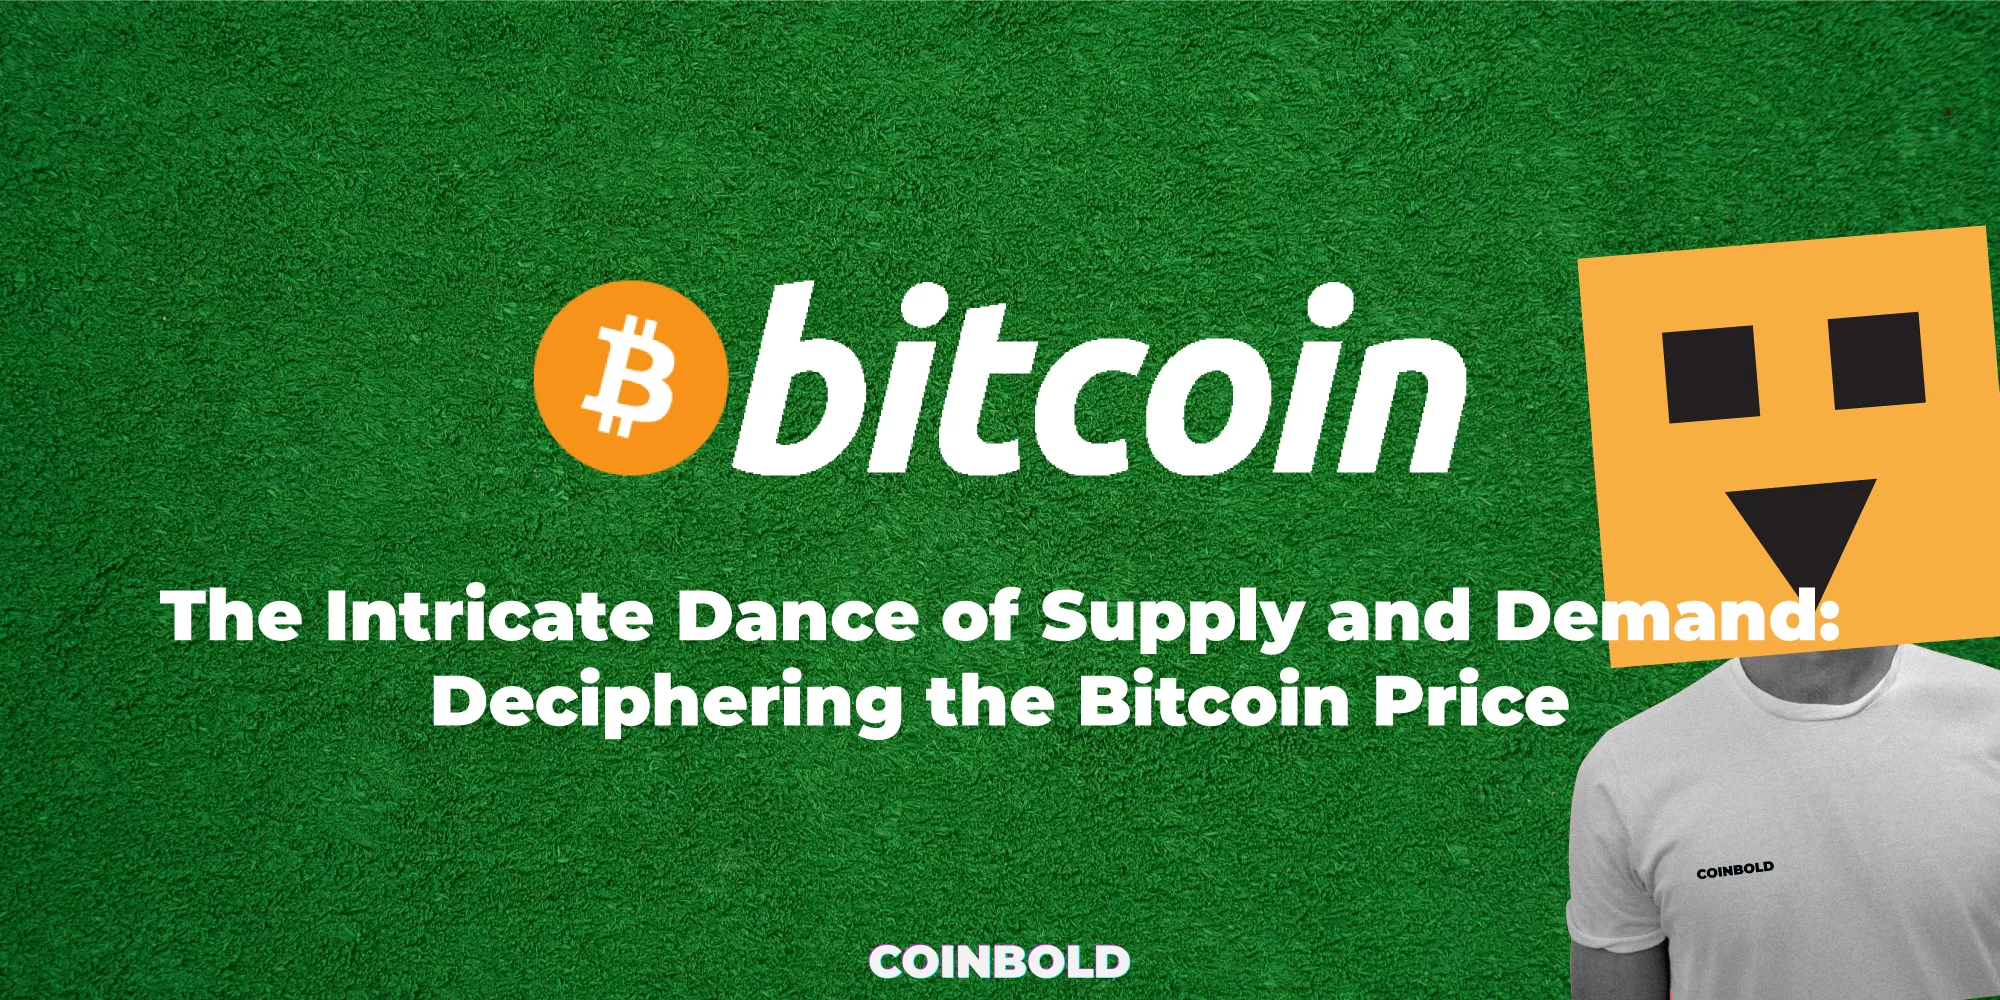 Bitcoin Price: Deciphering the Law of Supply and Demand